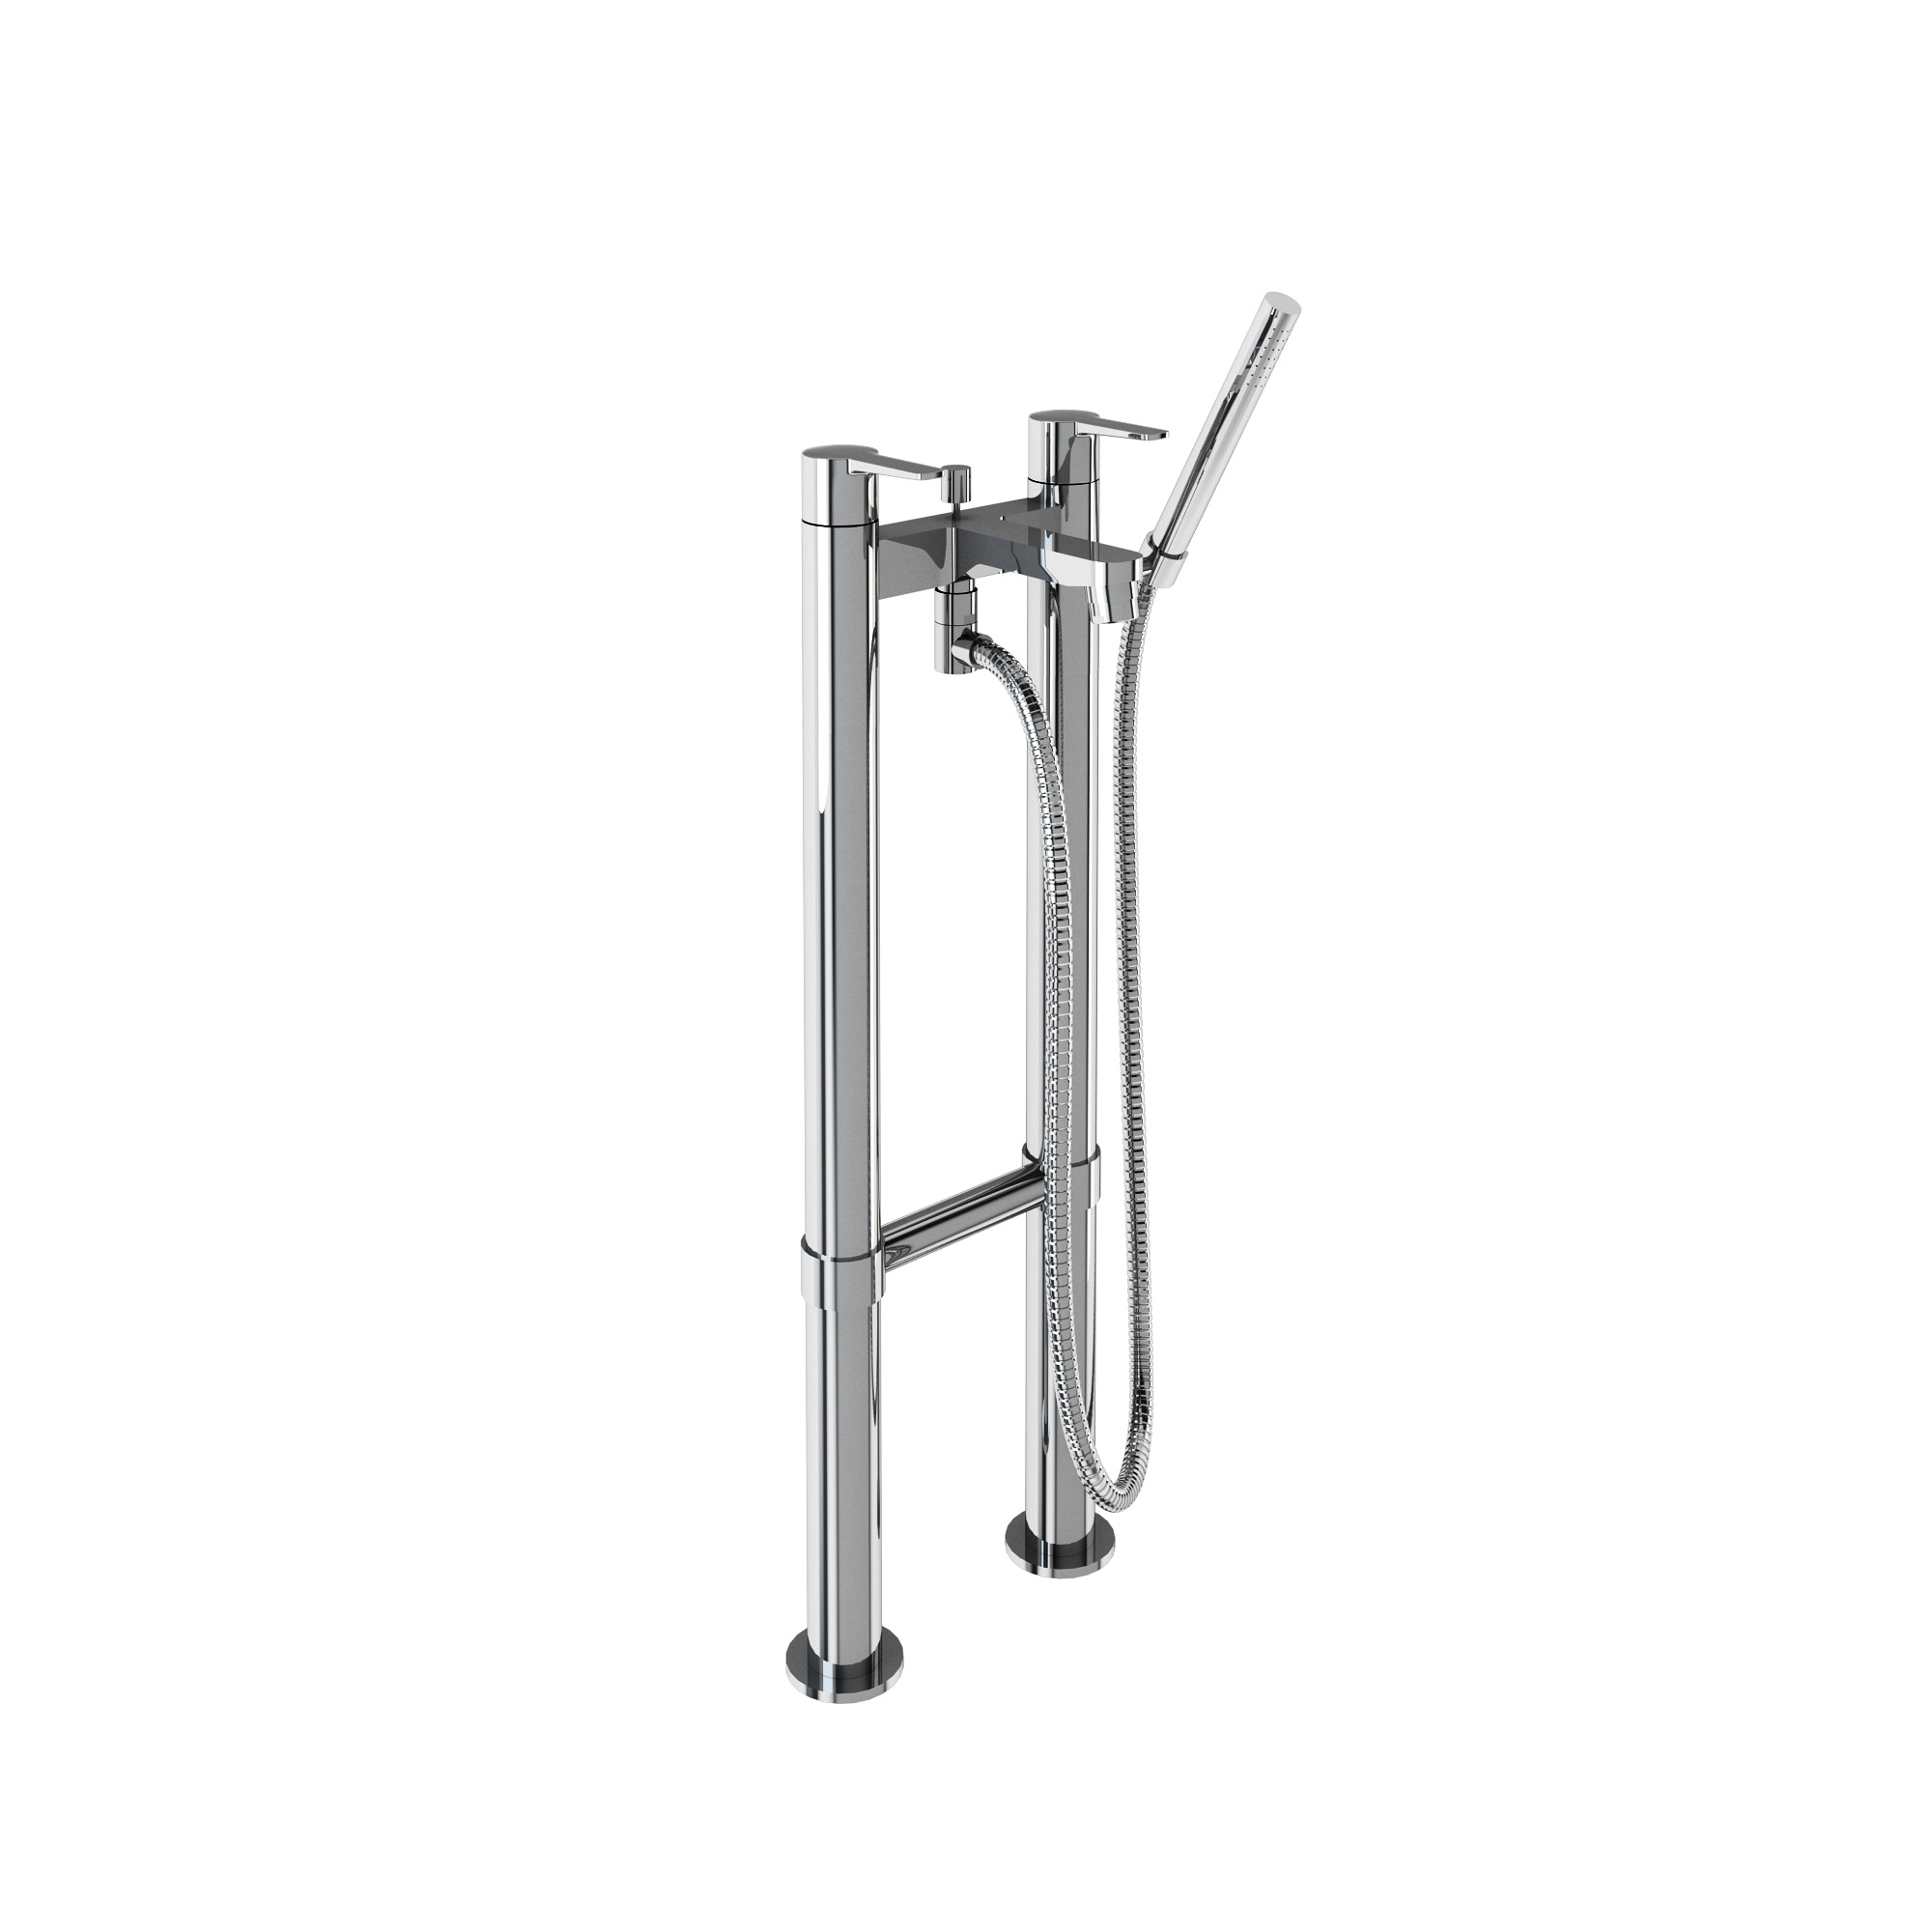 Crystal bath shower mixer on stand pipes floor-standing